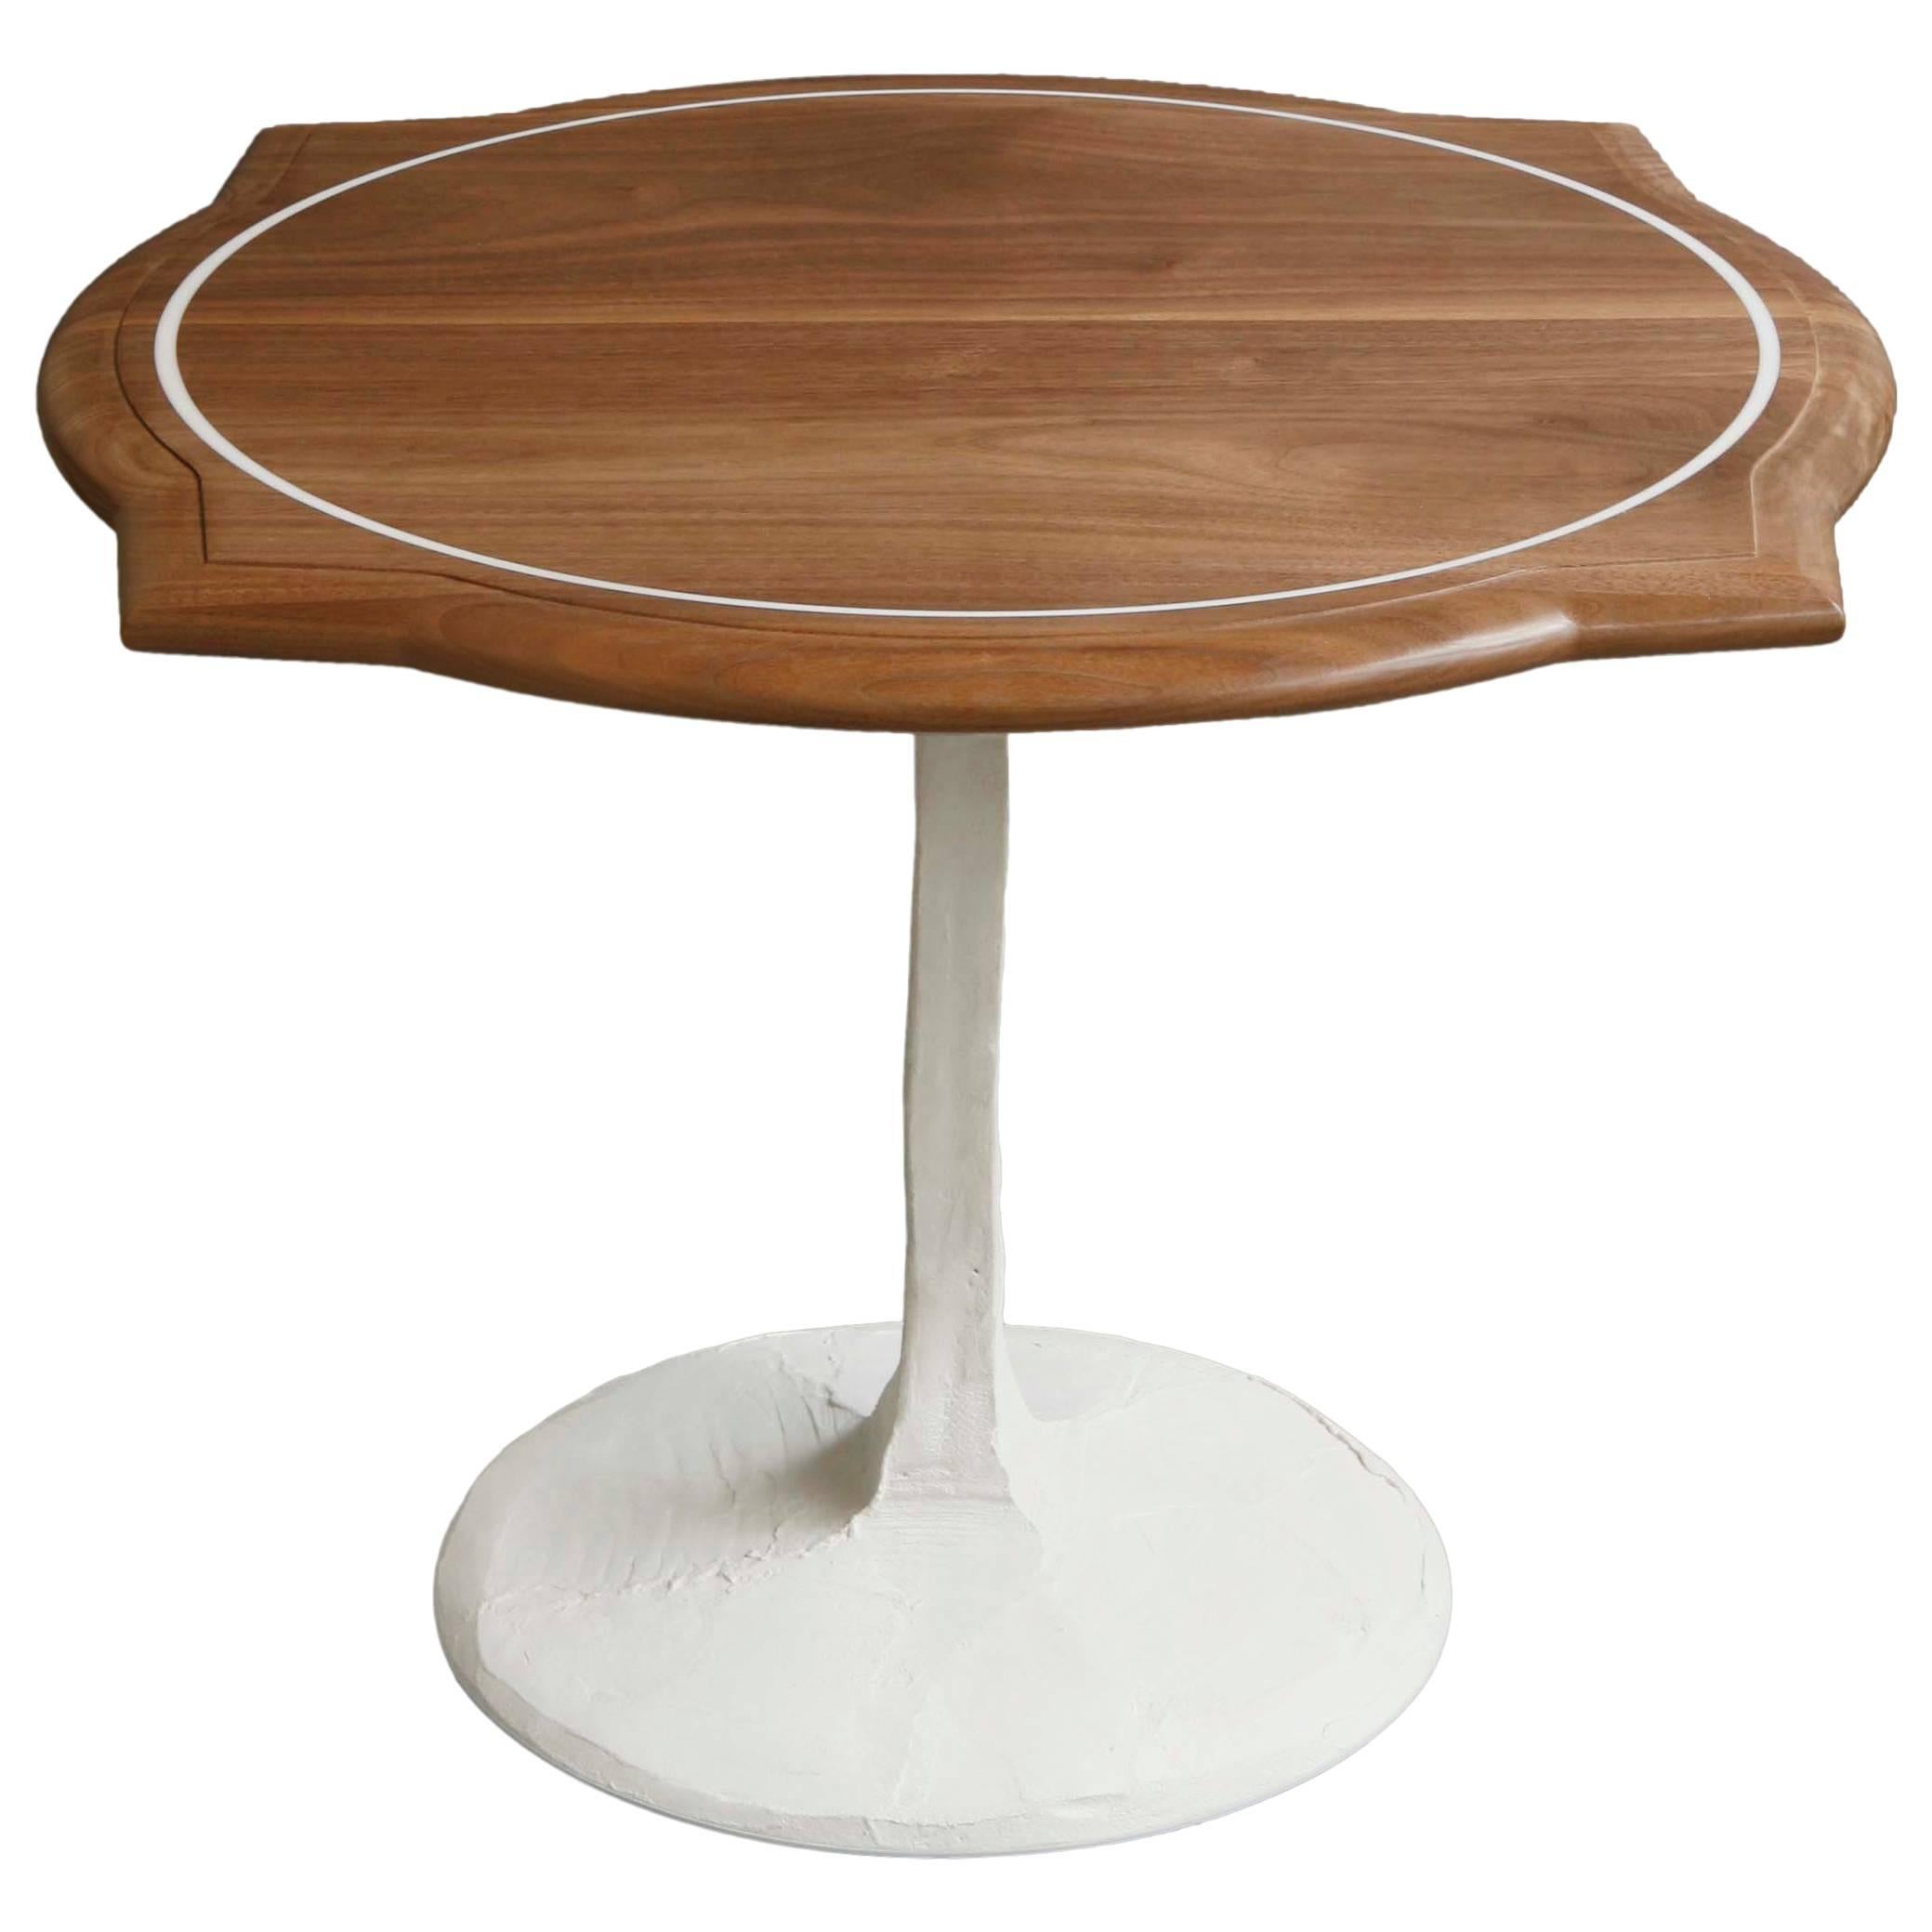 Caption Side Table -Walnut, Inlaid Resin, White Concrete Pedestal Base -IN STOCK For Sale